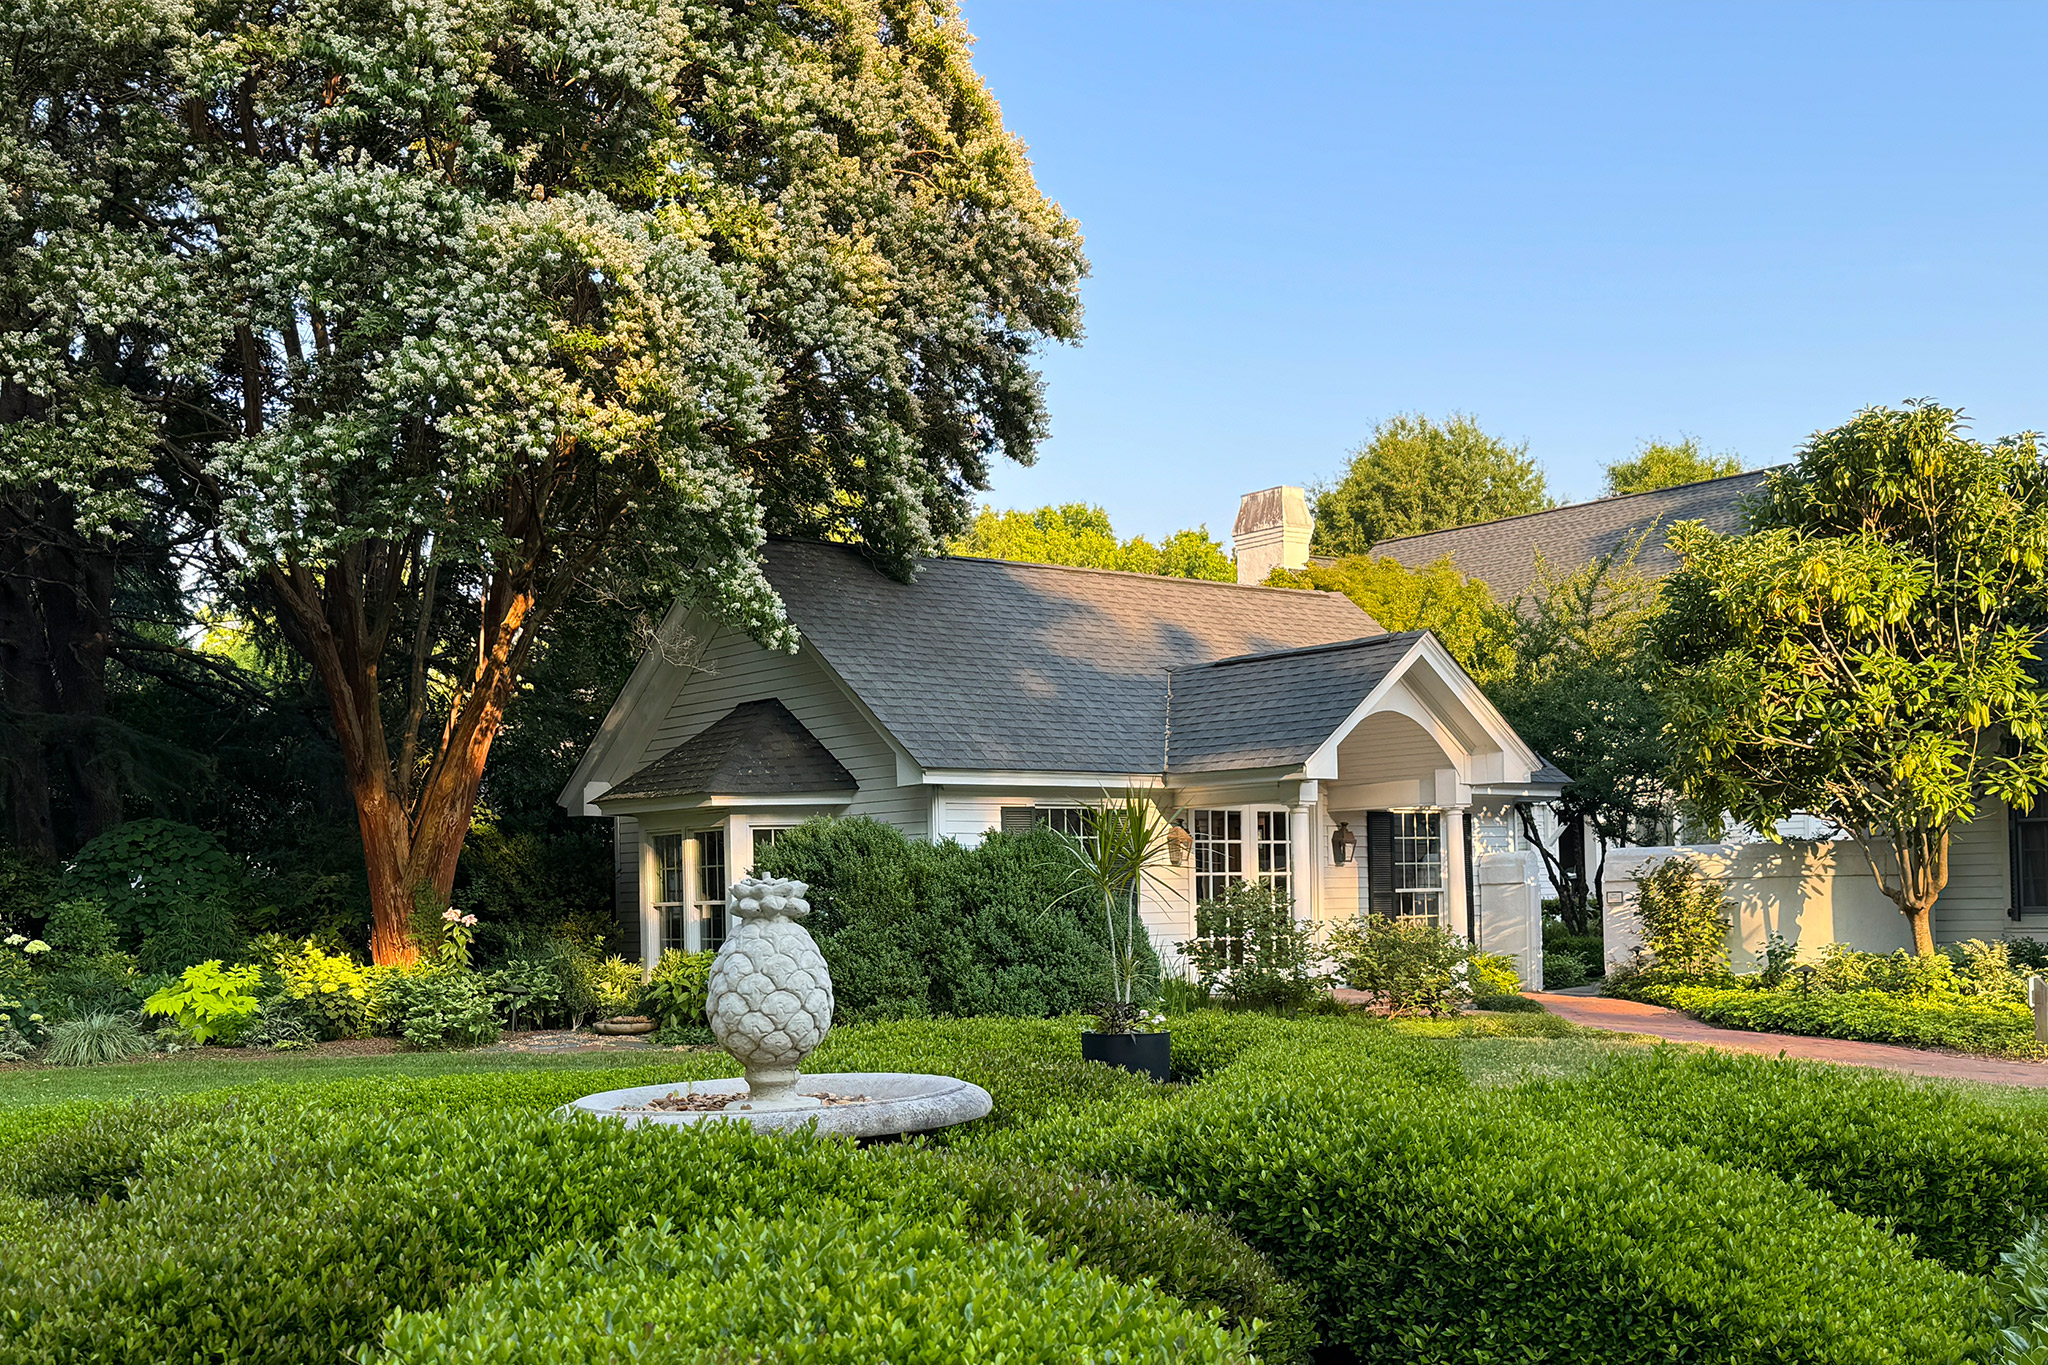 A charming house with a gray shingled roof and white trim sits amidst lush greenery. A pineapple-shaped fountain centerpiece stands in the well-manicured front garden, bordered by neatly trimmed hedges. Tall trees provide shade in the background under a clear blue sky. Fearrington Village